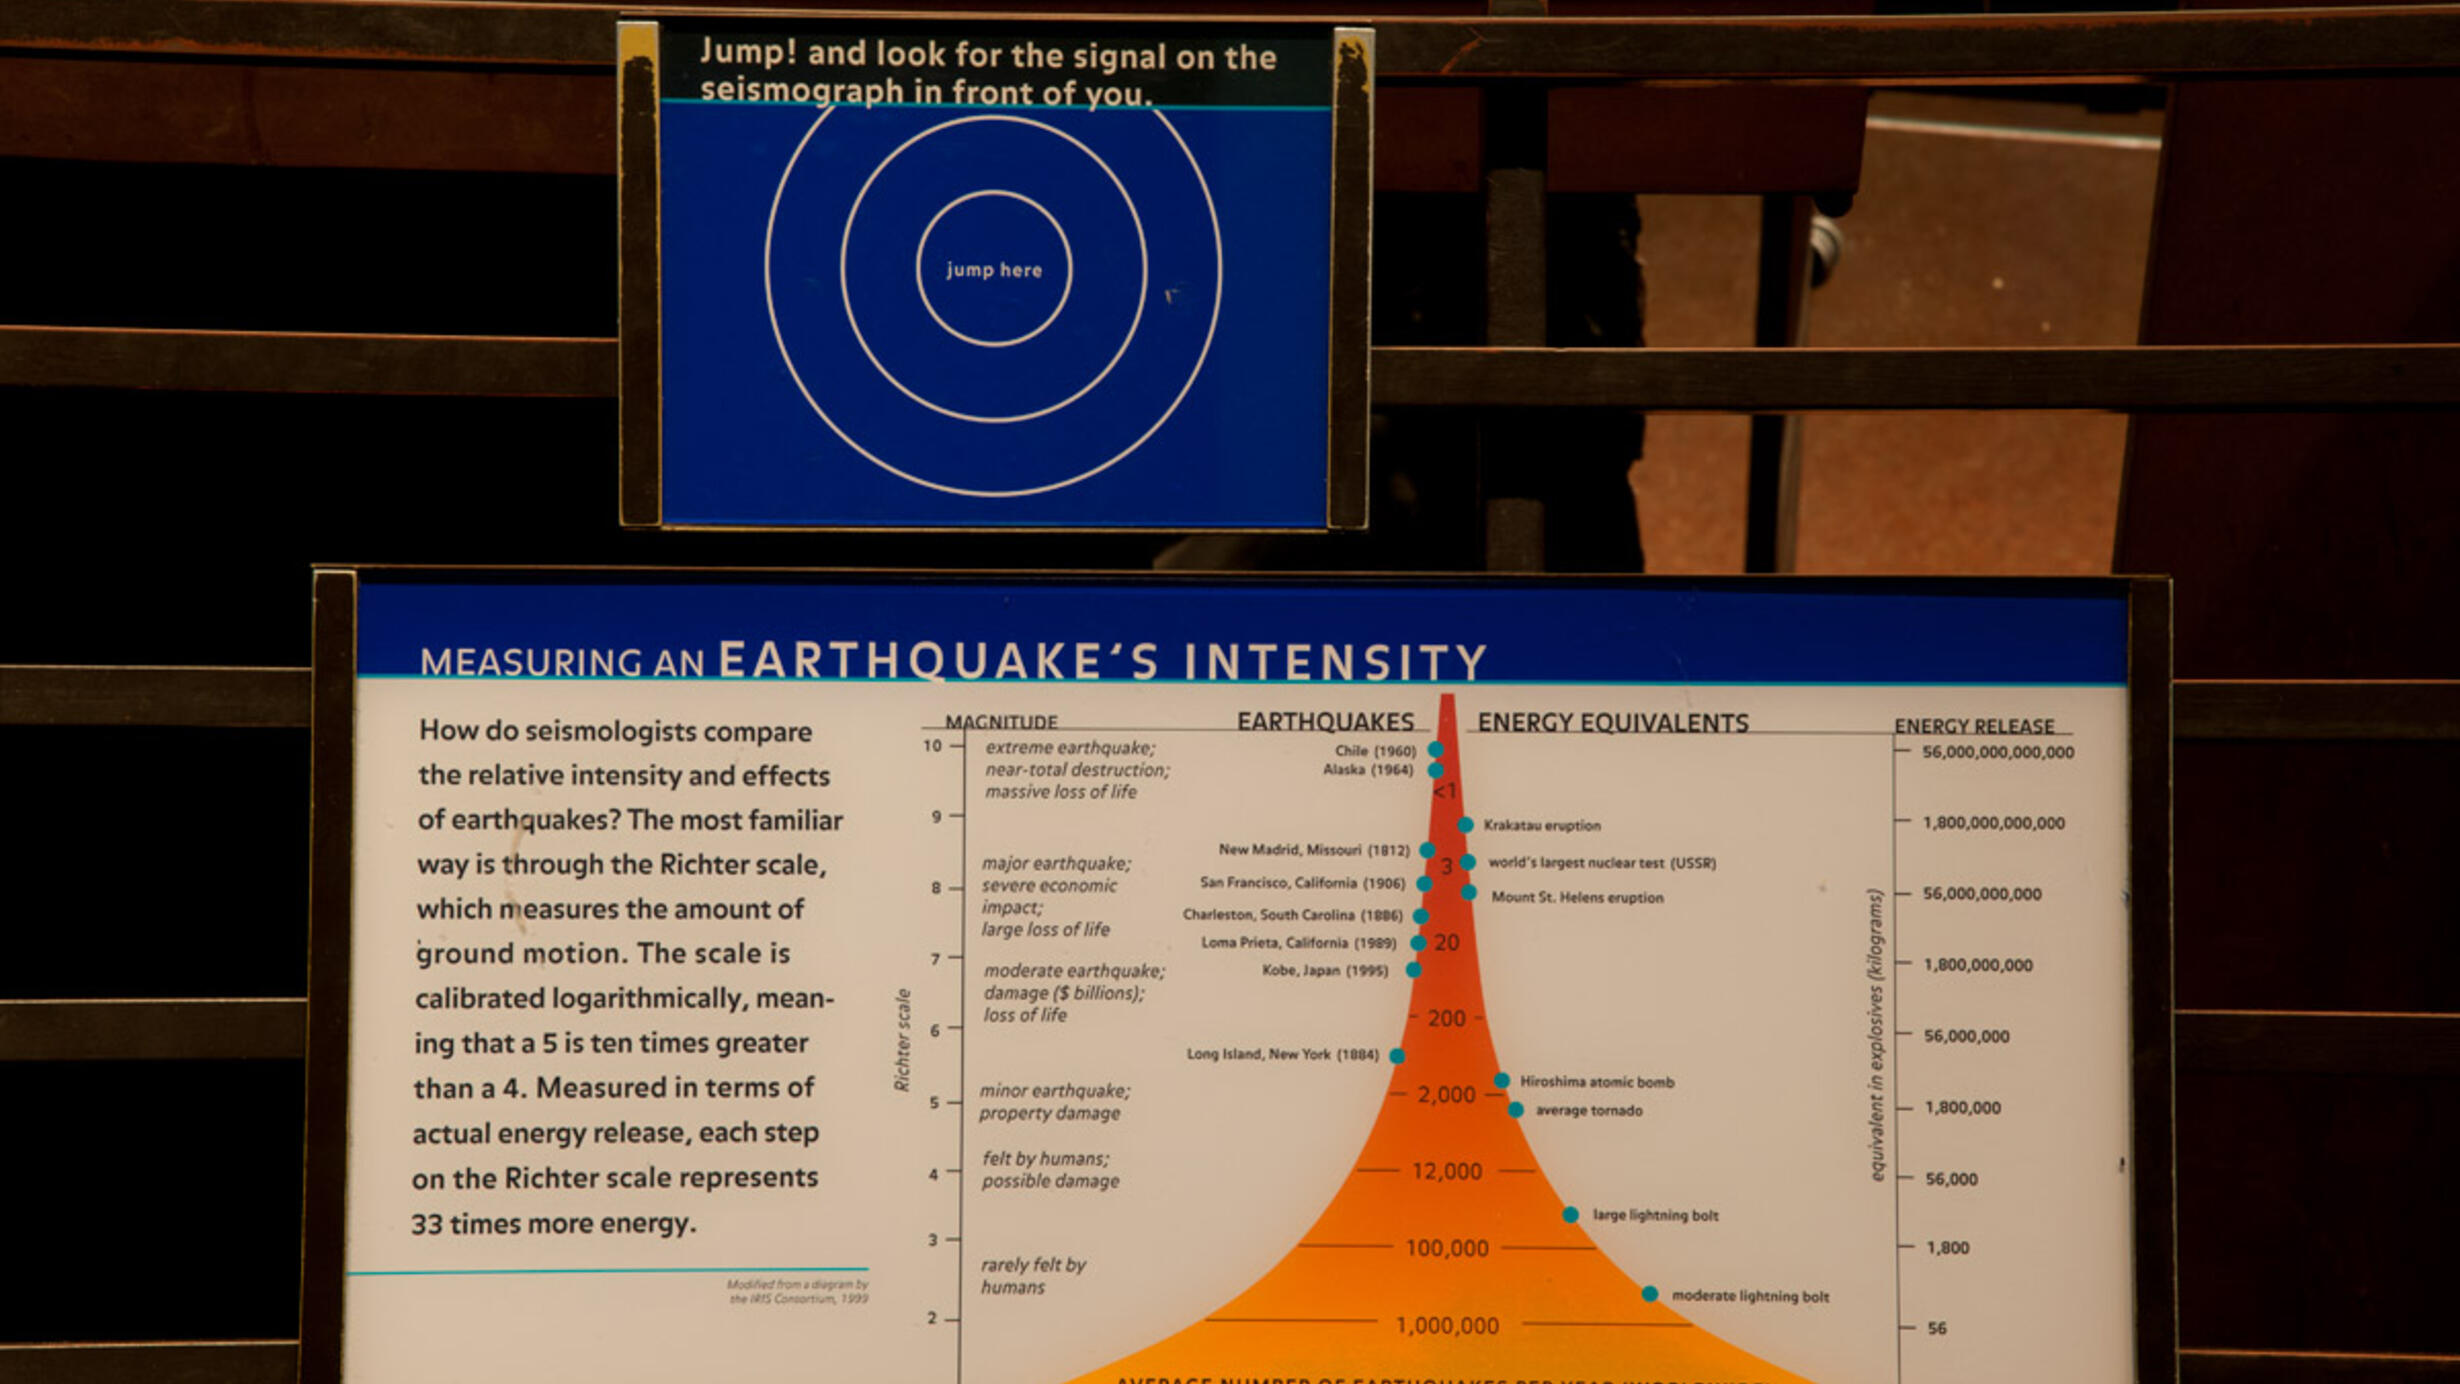 Measuring an Earthquake's Intensity